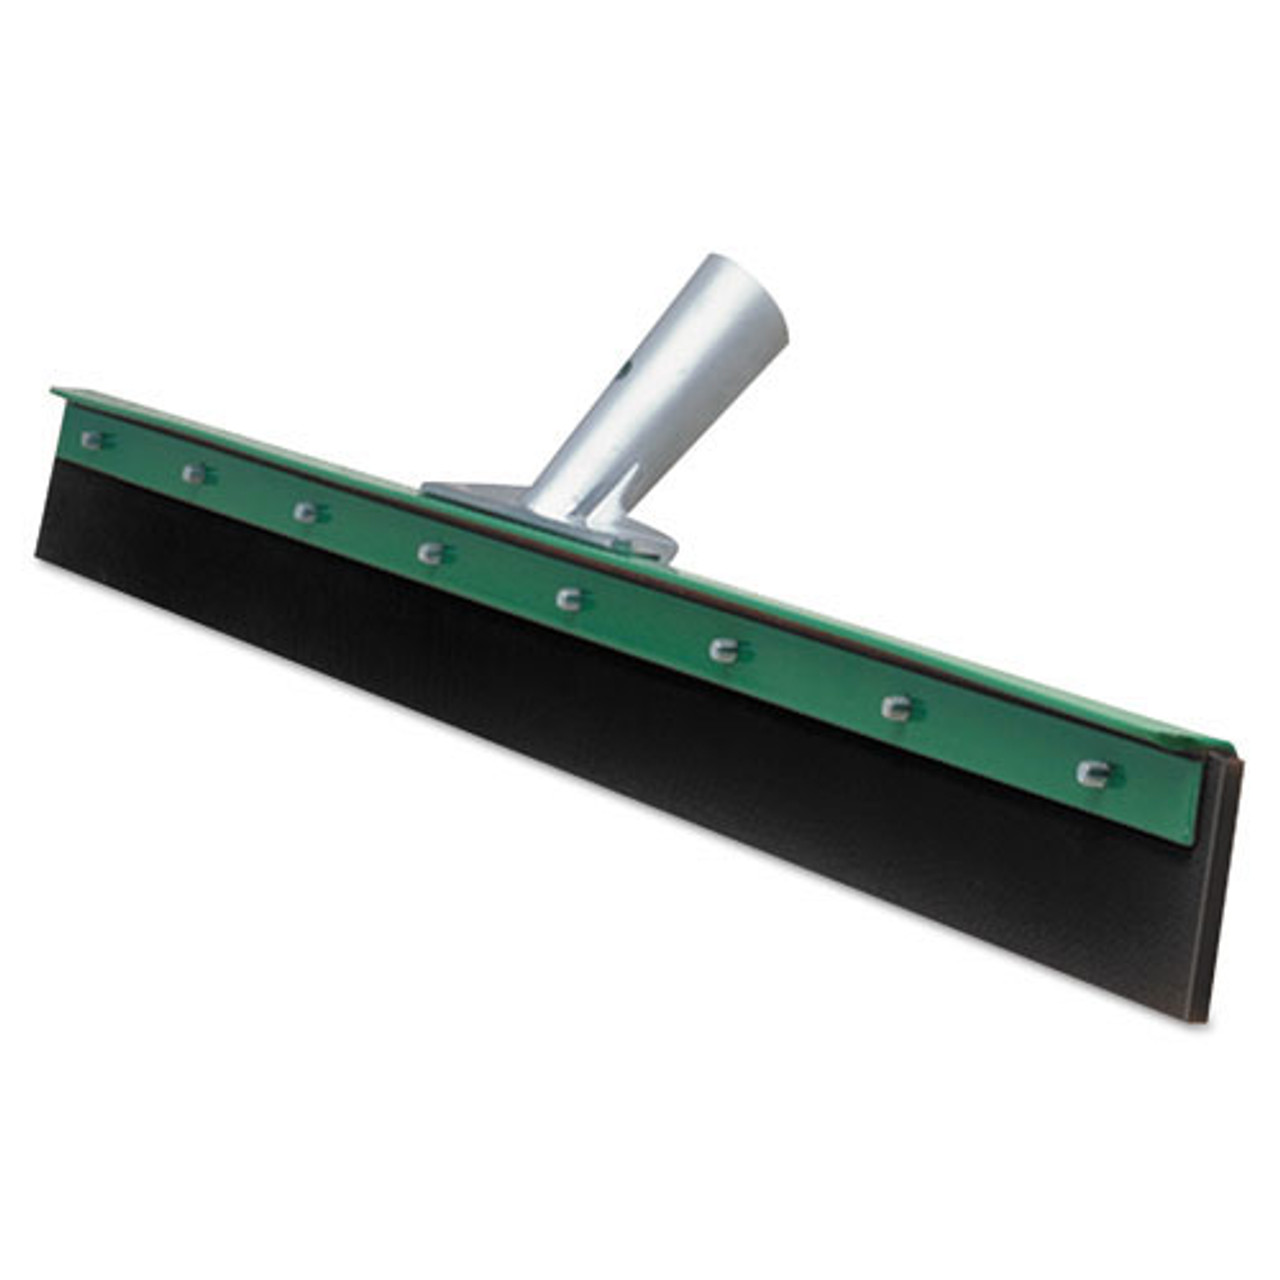 All-Purpose Squeegee